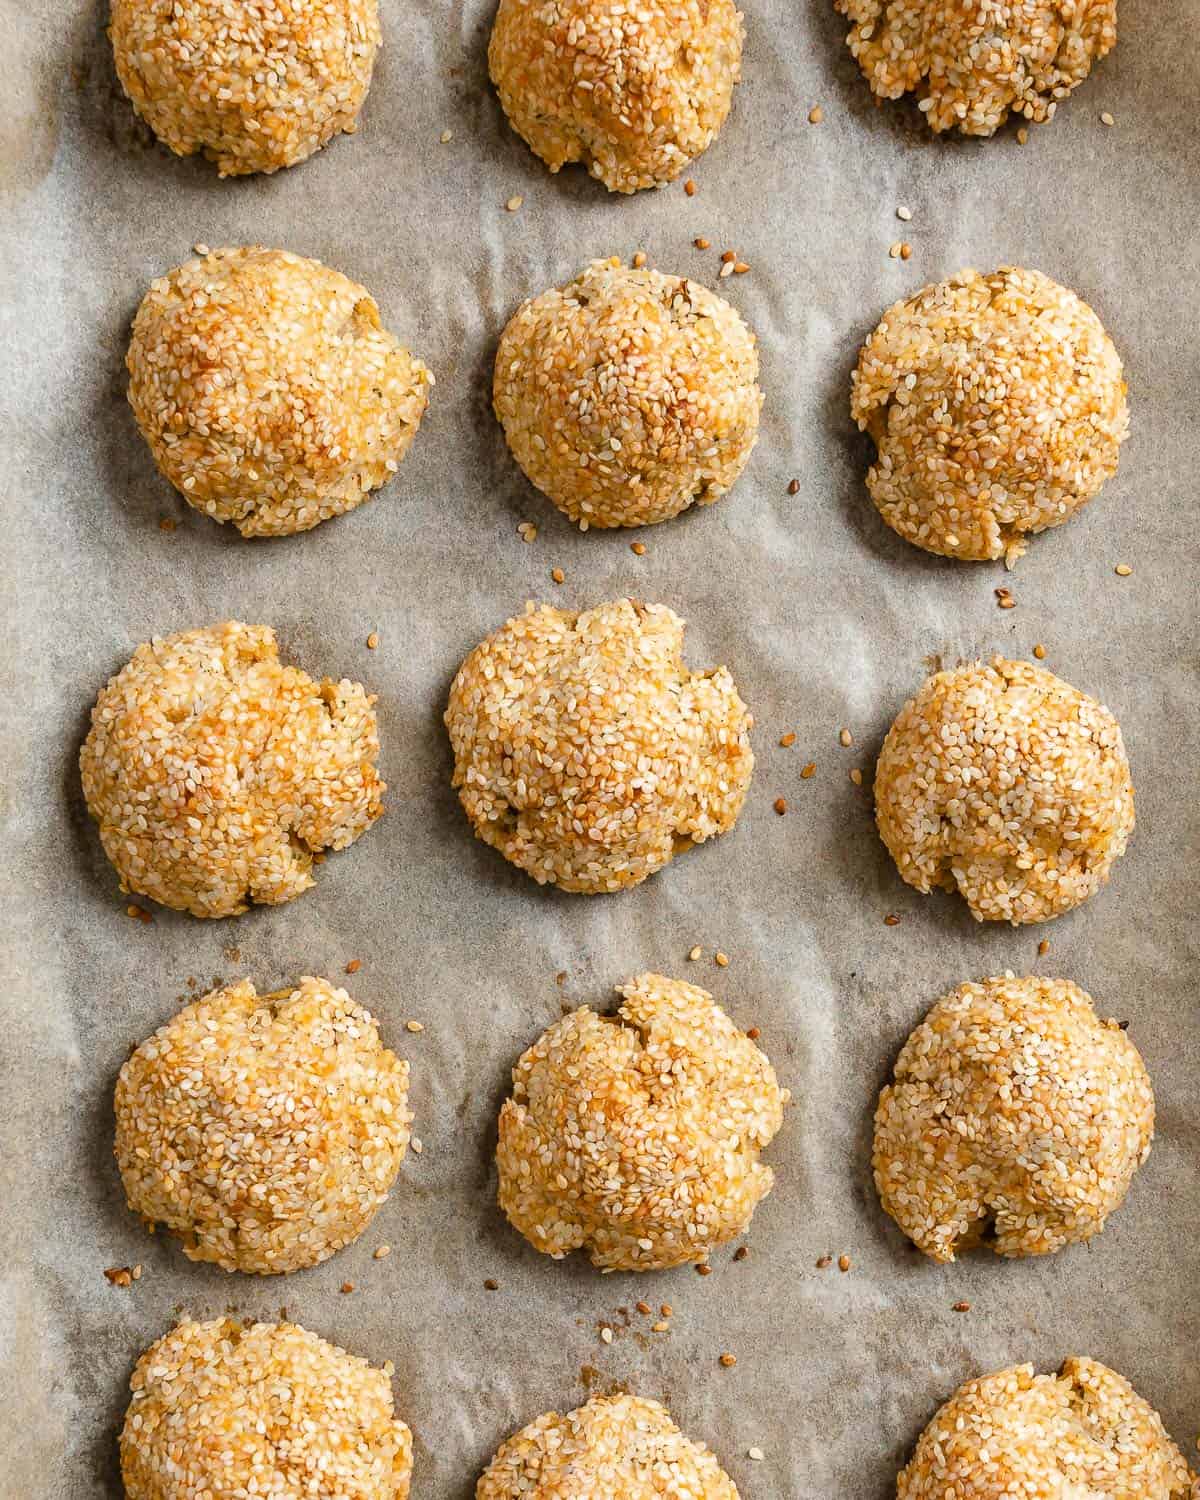 completed Sesame Potato Puffs on a baking tray